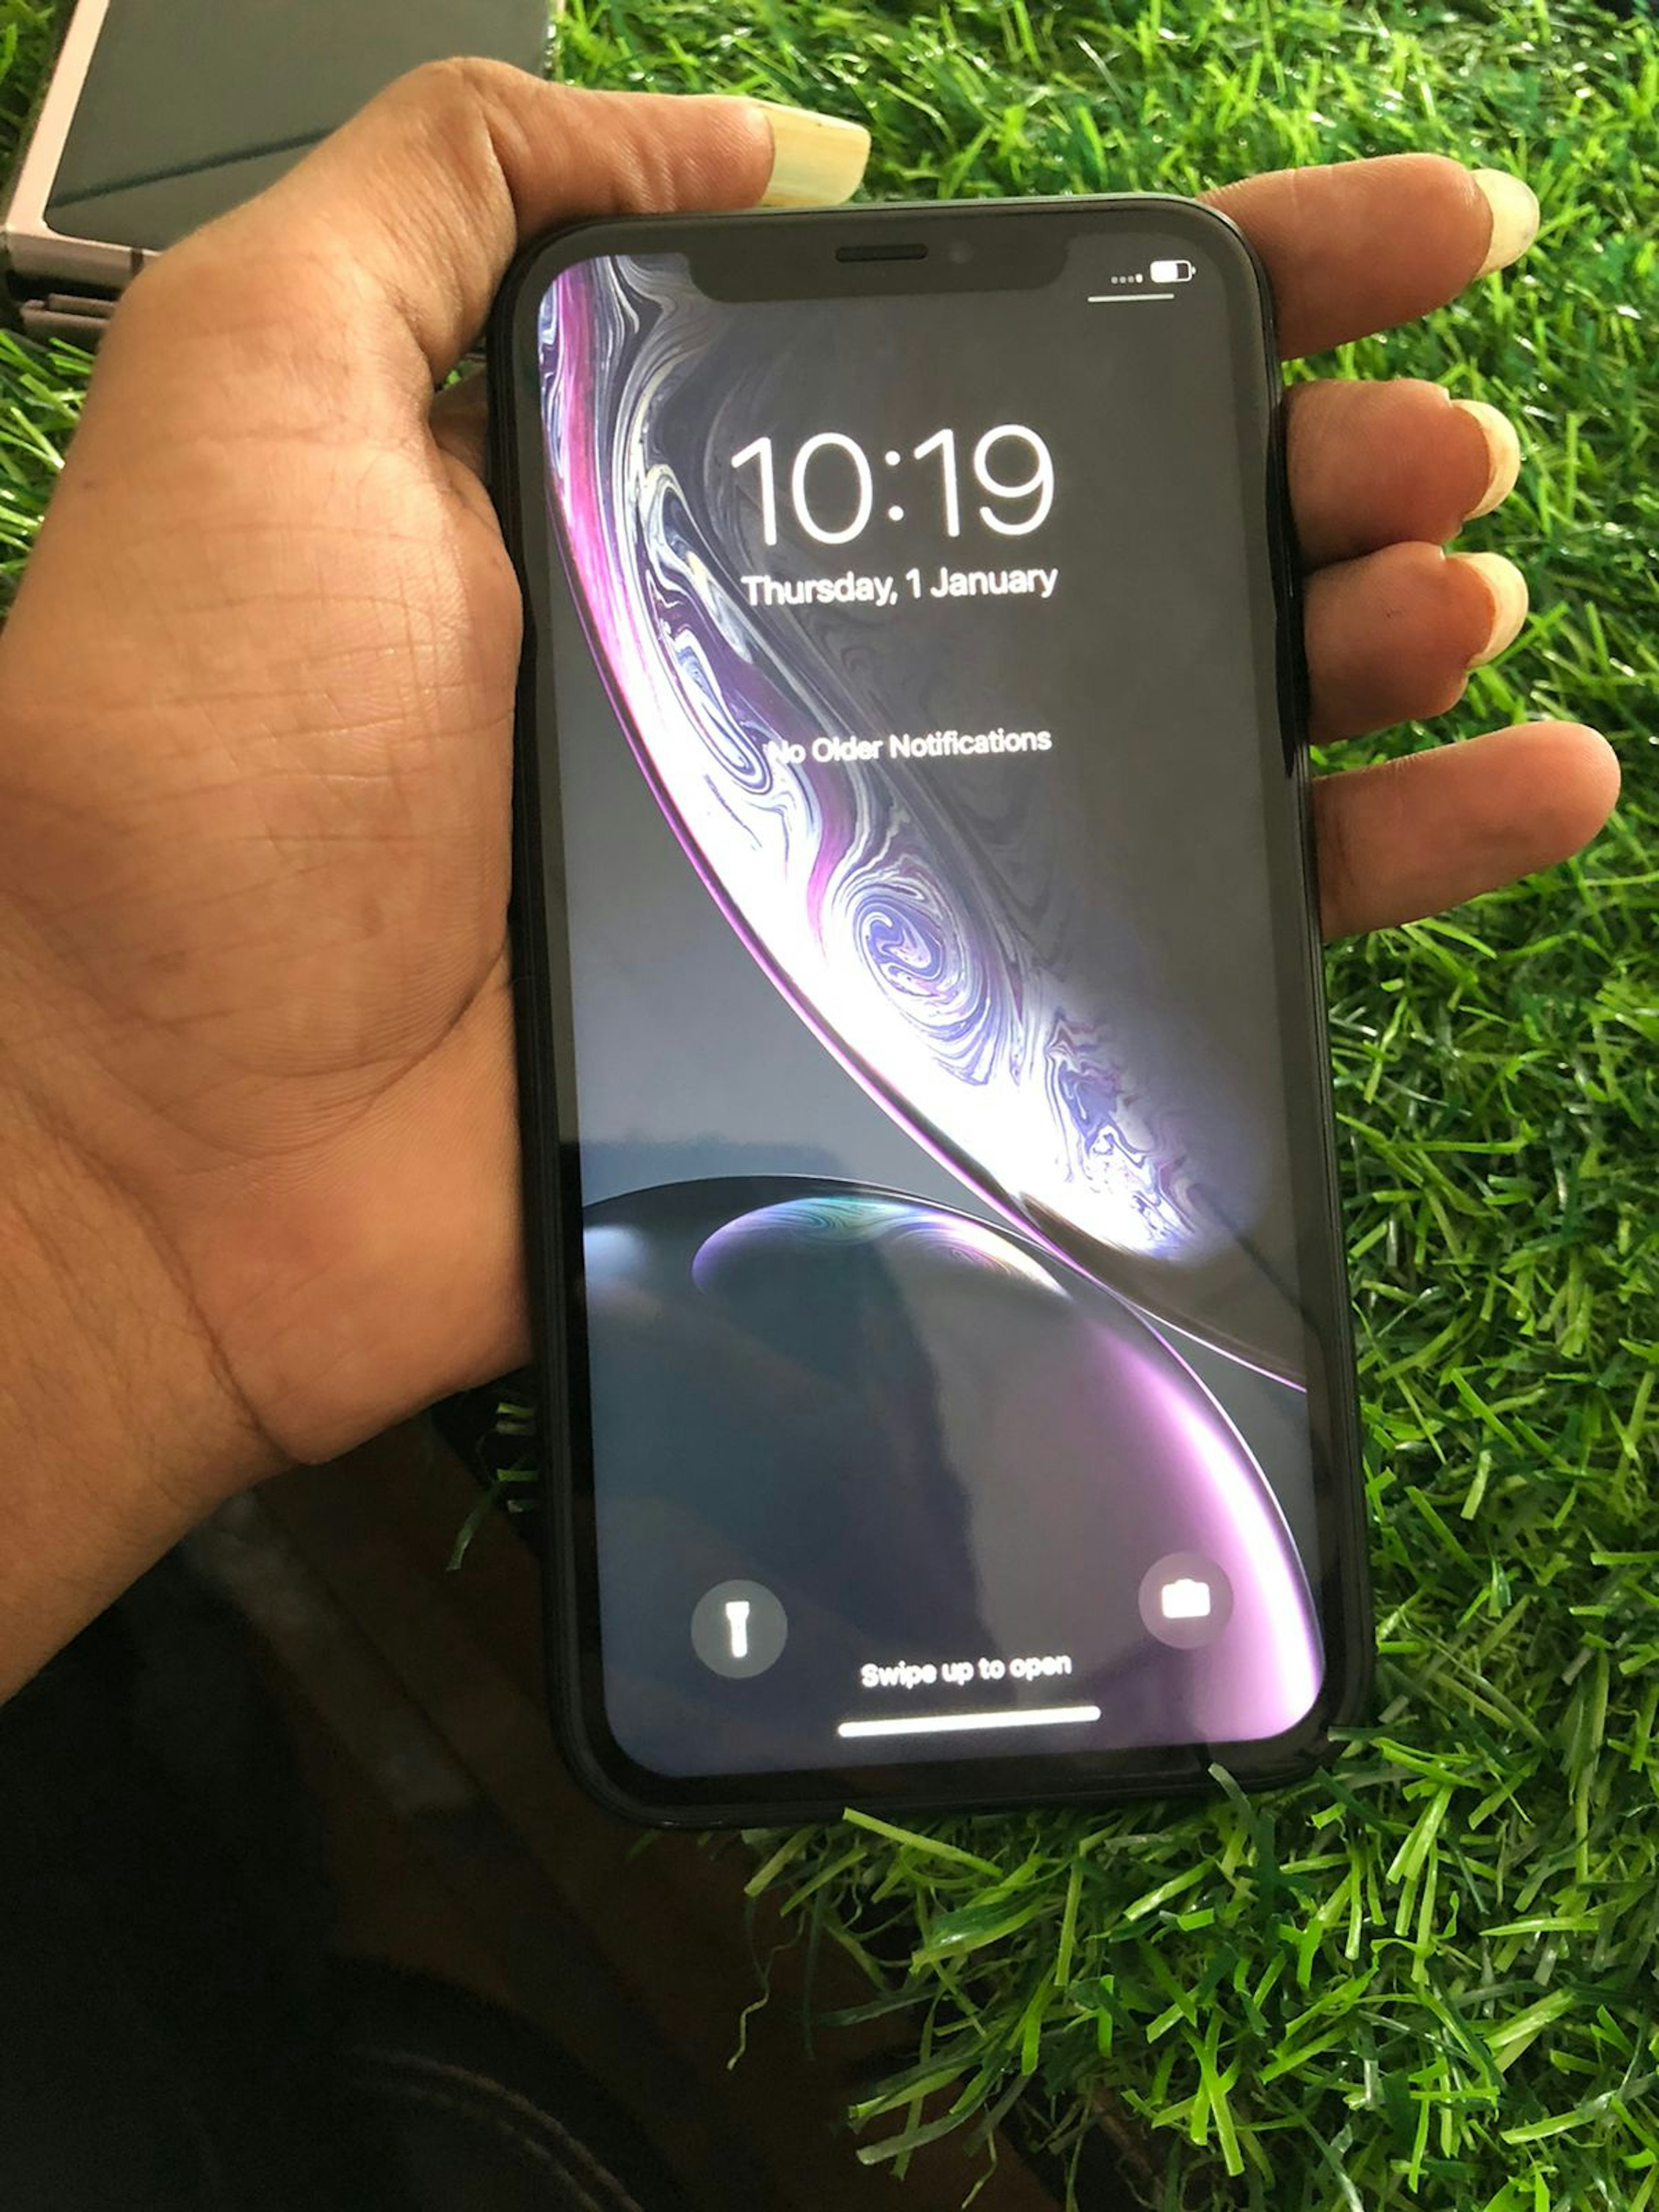 View - Iphone xr 64gb black color price photos, Iphone xr 64gb black color price available in Ahmedabad, make deal in 22490